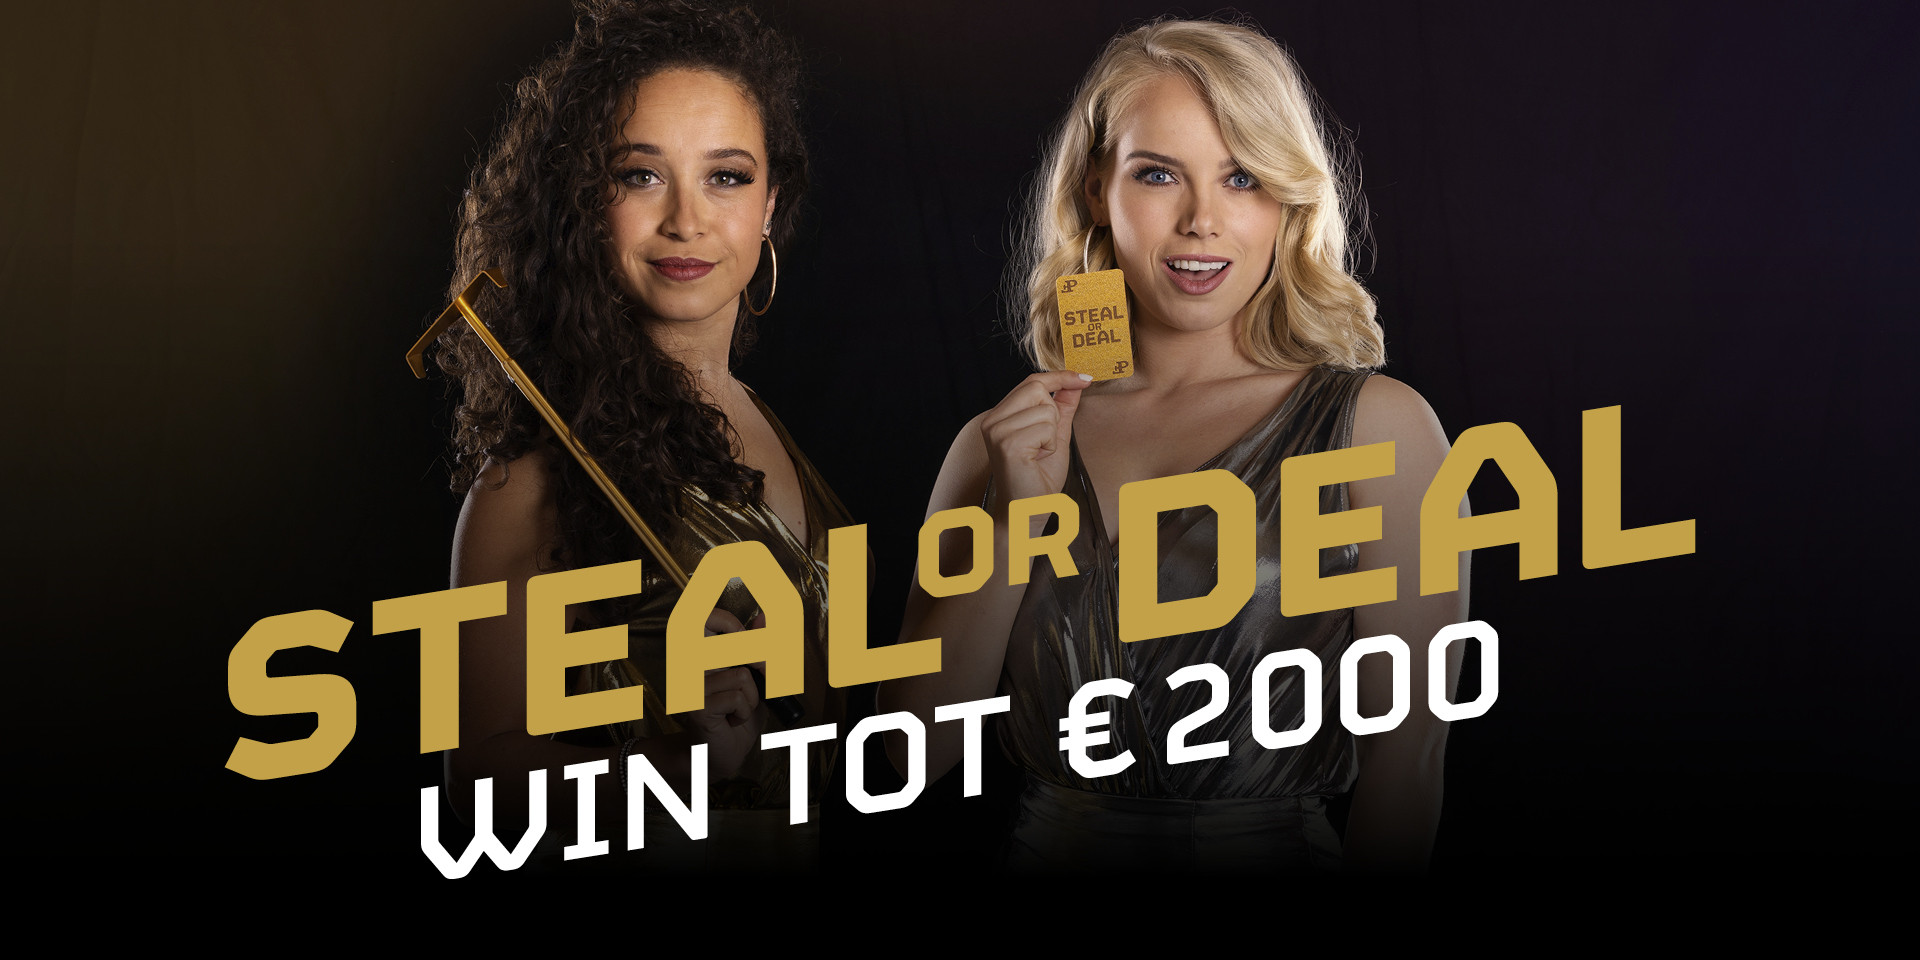 Steal or Deal on tour!